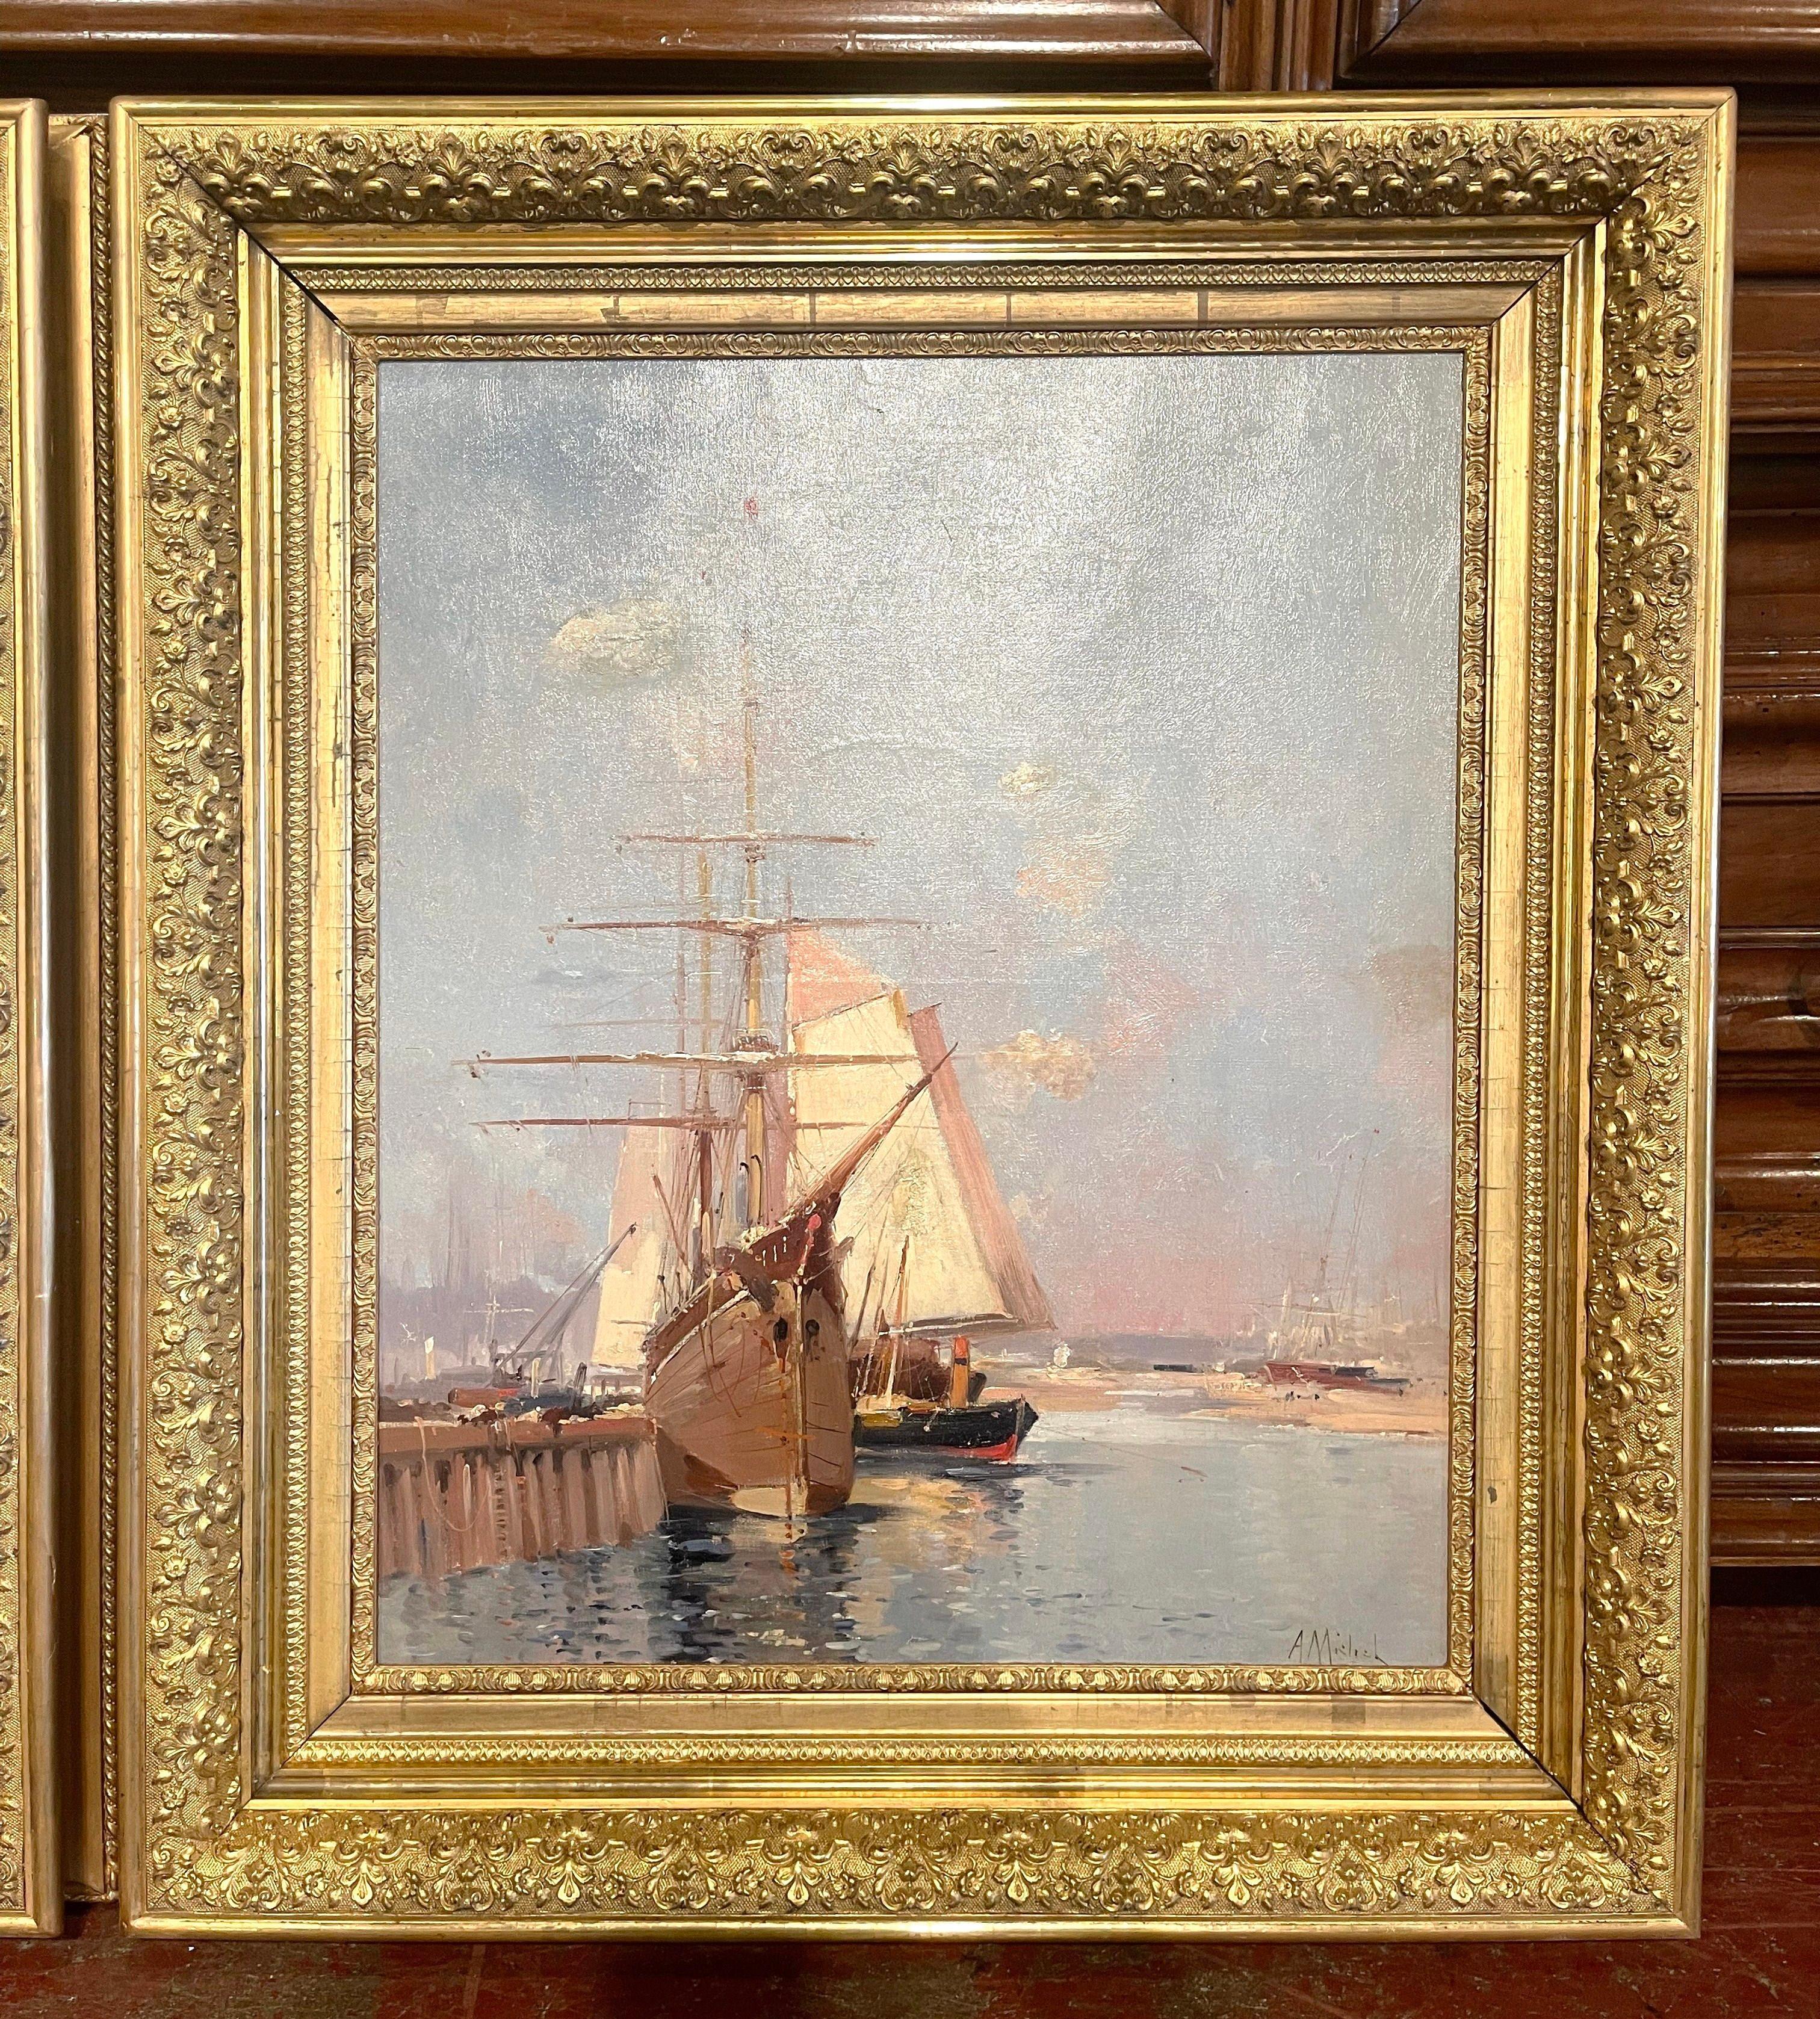 Carved Pair of 19th Century Ship Oil Paintings Signed A. Michel for E. Galien-Laloue